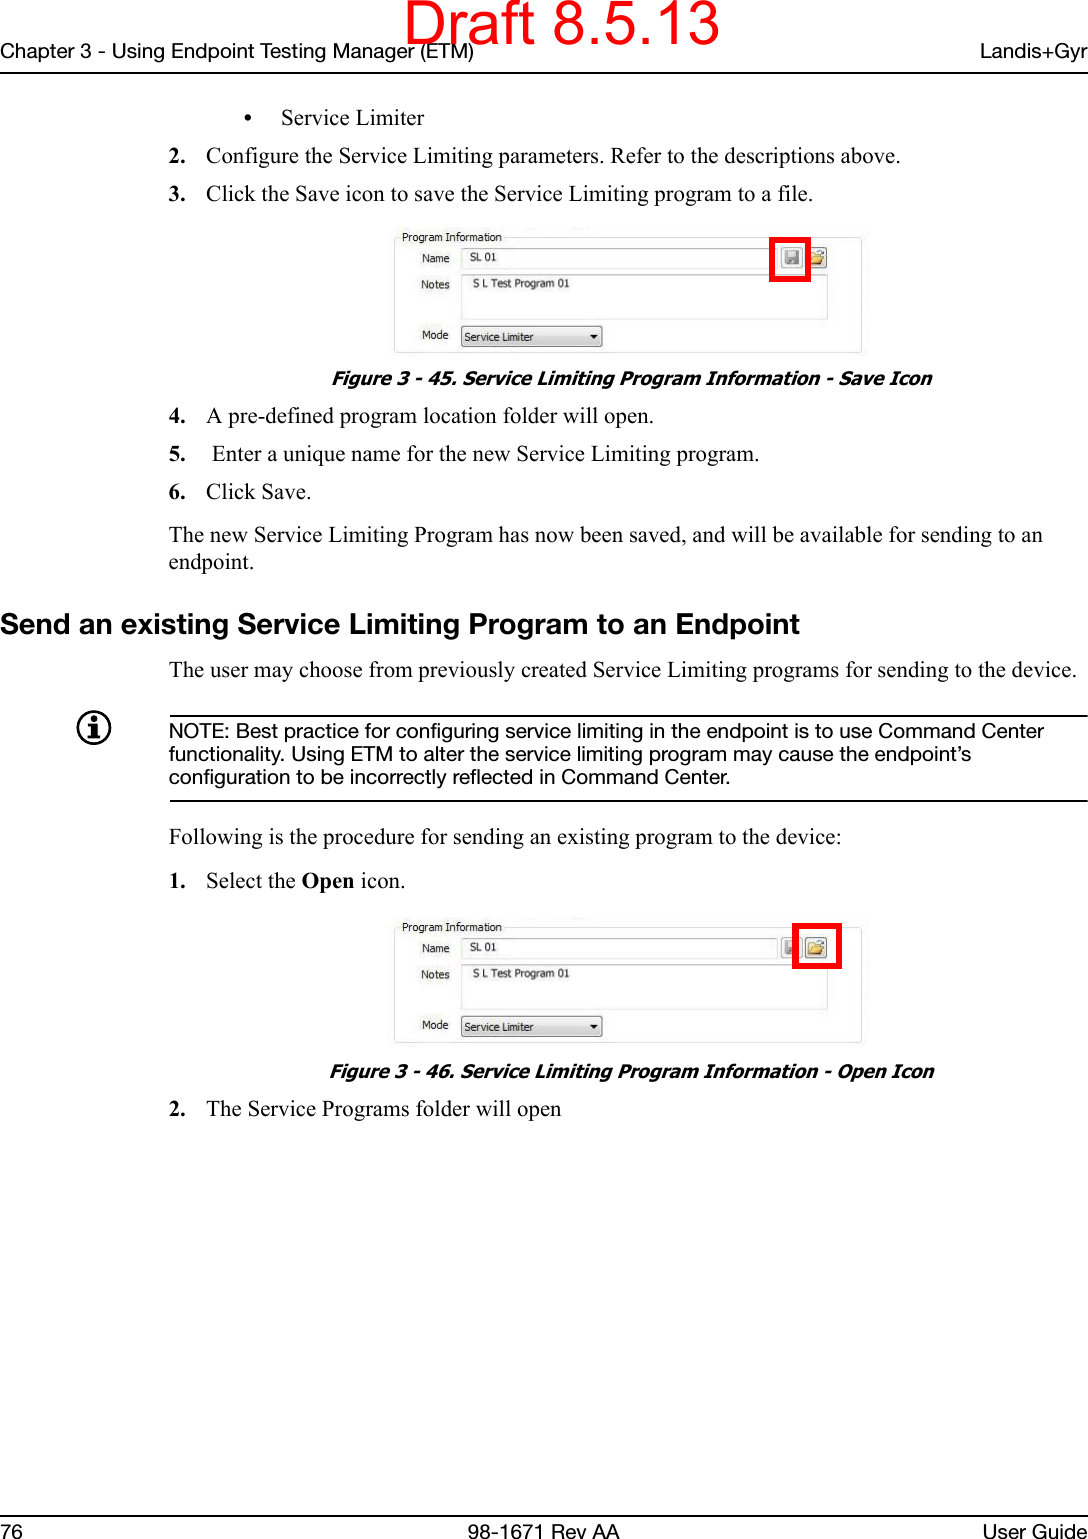 Chapter 3 - Using Endpoint Testing Manager (ETM) Landis+Gyr76 98-1671 Rev AA User Guide•Service Limiter2. Configure the Service Limiting parameters. Refer to the descriptions above.3. Click the Save icon to save the Service Limiting program to a file.  Figure 3 - 45. Service Limiting Program Information - Save Icon4. A pre-defined program location folder will open.5.  Enter a unique name for the new Service Limiting program.6. Click Save.The new Service Limiting Program has now been saved, and will be available for sending to an endpoint.Send an existing Service Limiting Program to an EndpointThe user may choose from previously created Service Limiting programs for sending to the device. NOTE: Best practice for configuring service limiting in the endpoint is to use Command Center functionality. Using ETM to alter the service limiting program may cause the endpoint’s configuration to be incorrectly reflected in Command Center. Following is the procedure for sending an existing program to the device:1. Select the Open icon. Figure 3 - 46. Service Limiting Program Information - Open Icon2. The Service Programs folder will openDraft 8.5.13